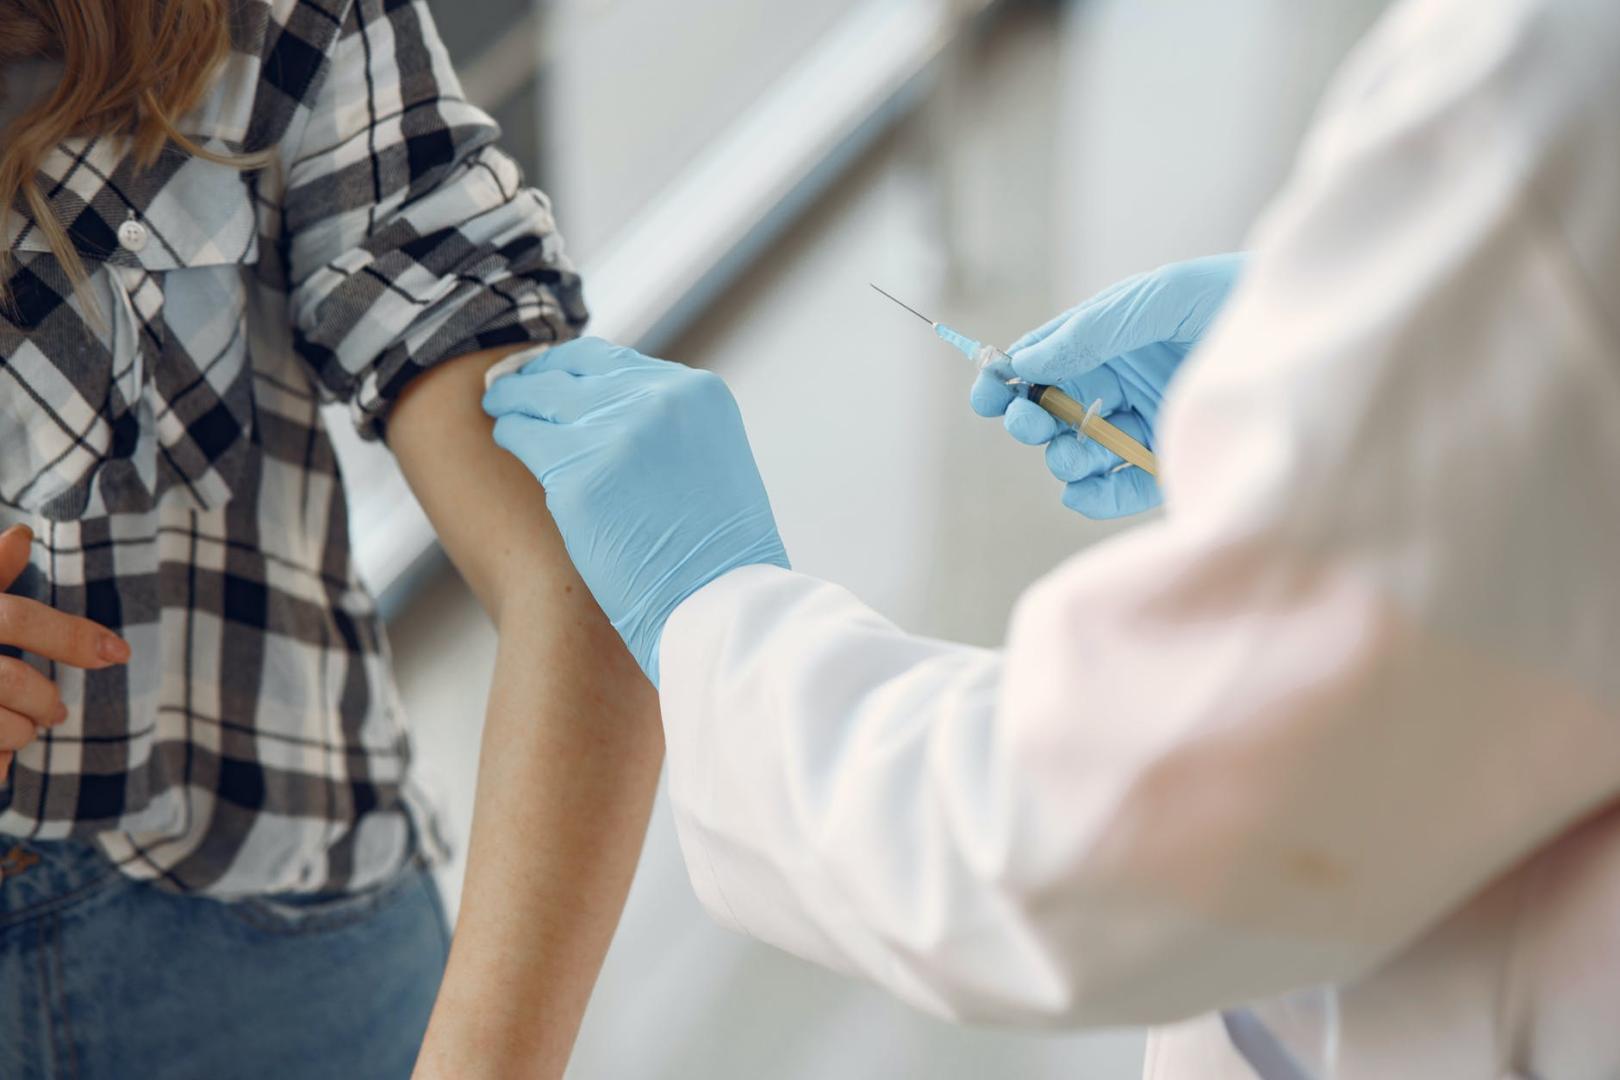 medical professional administering a vaccination into patient's arm via a syringe